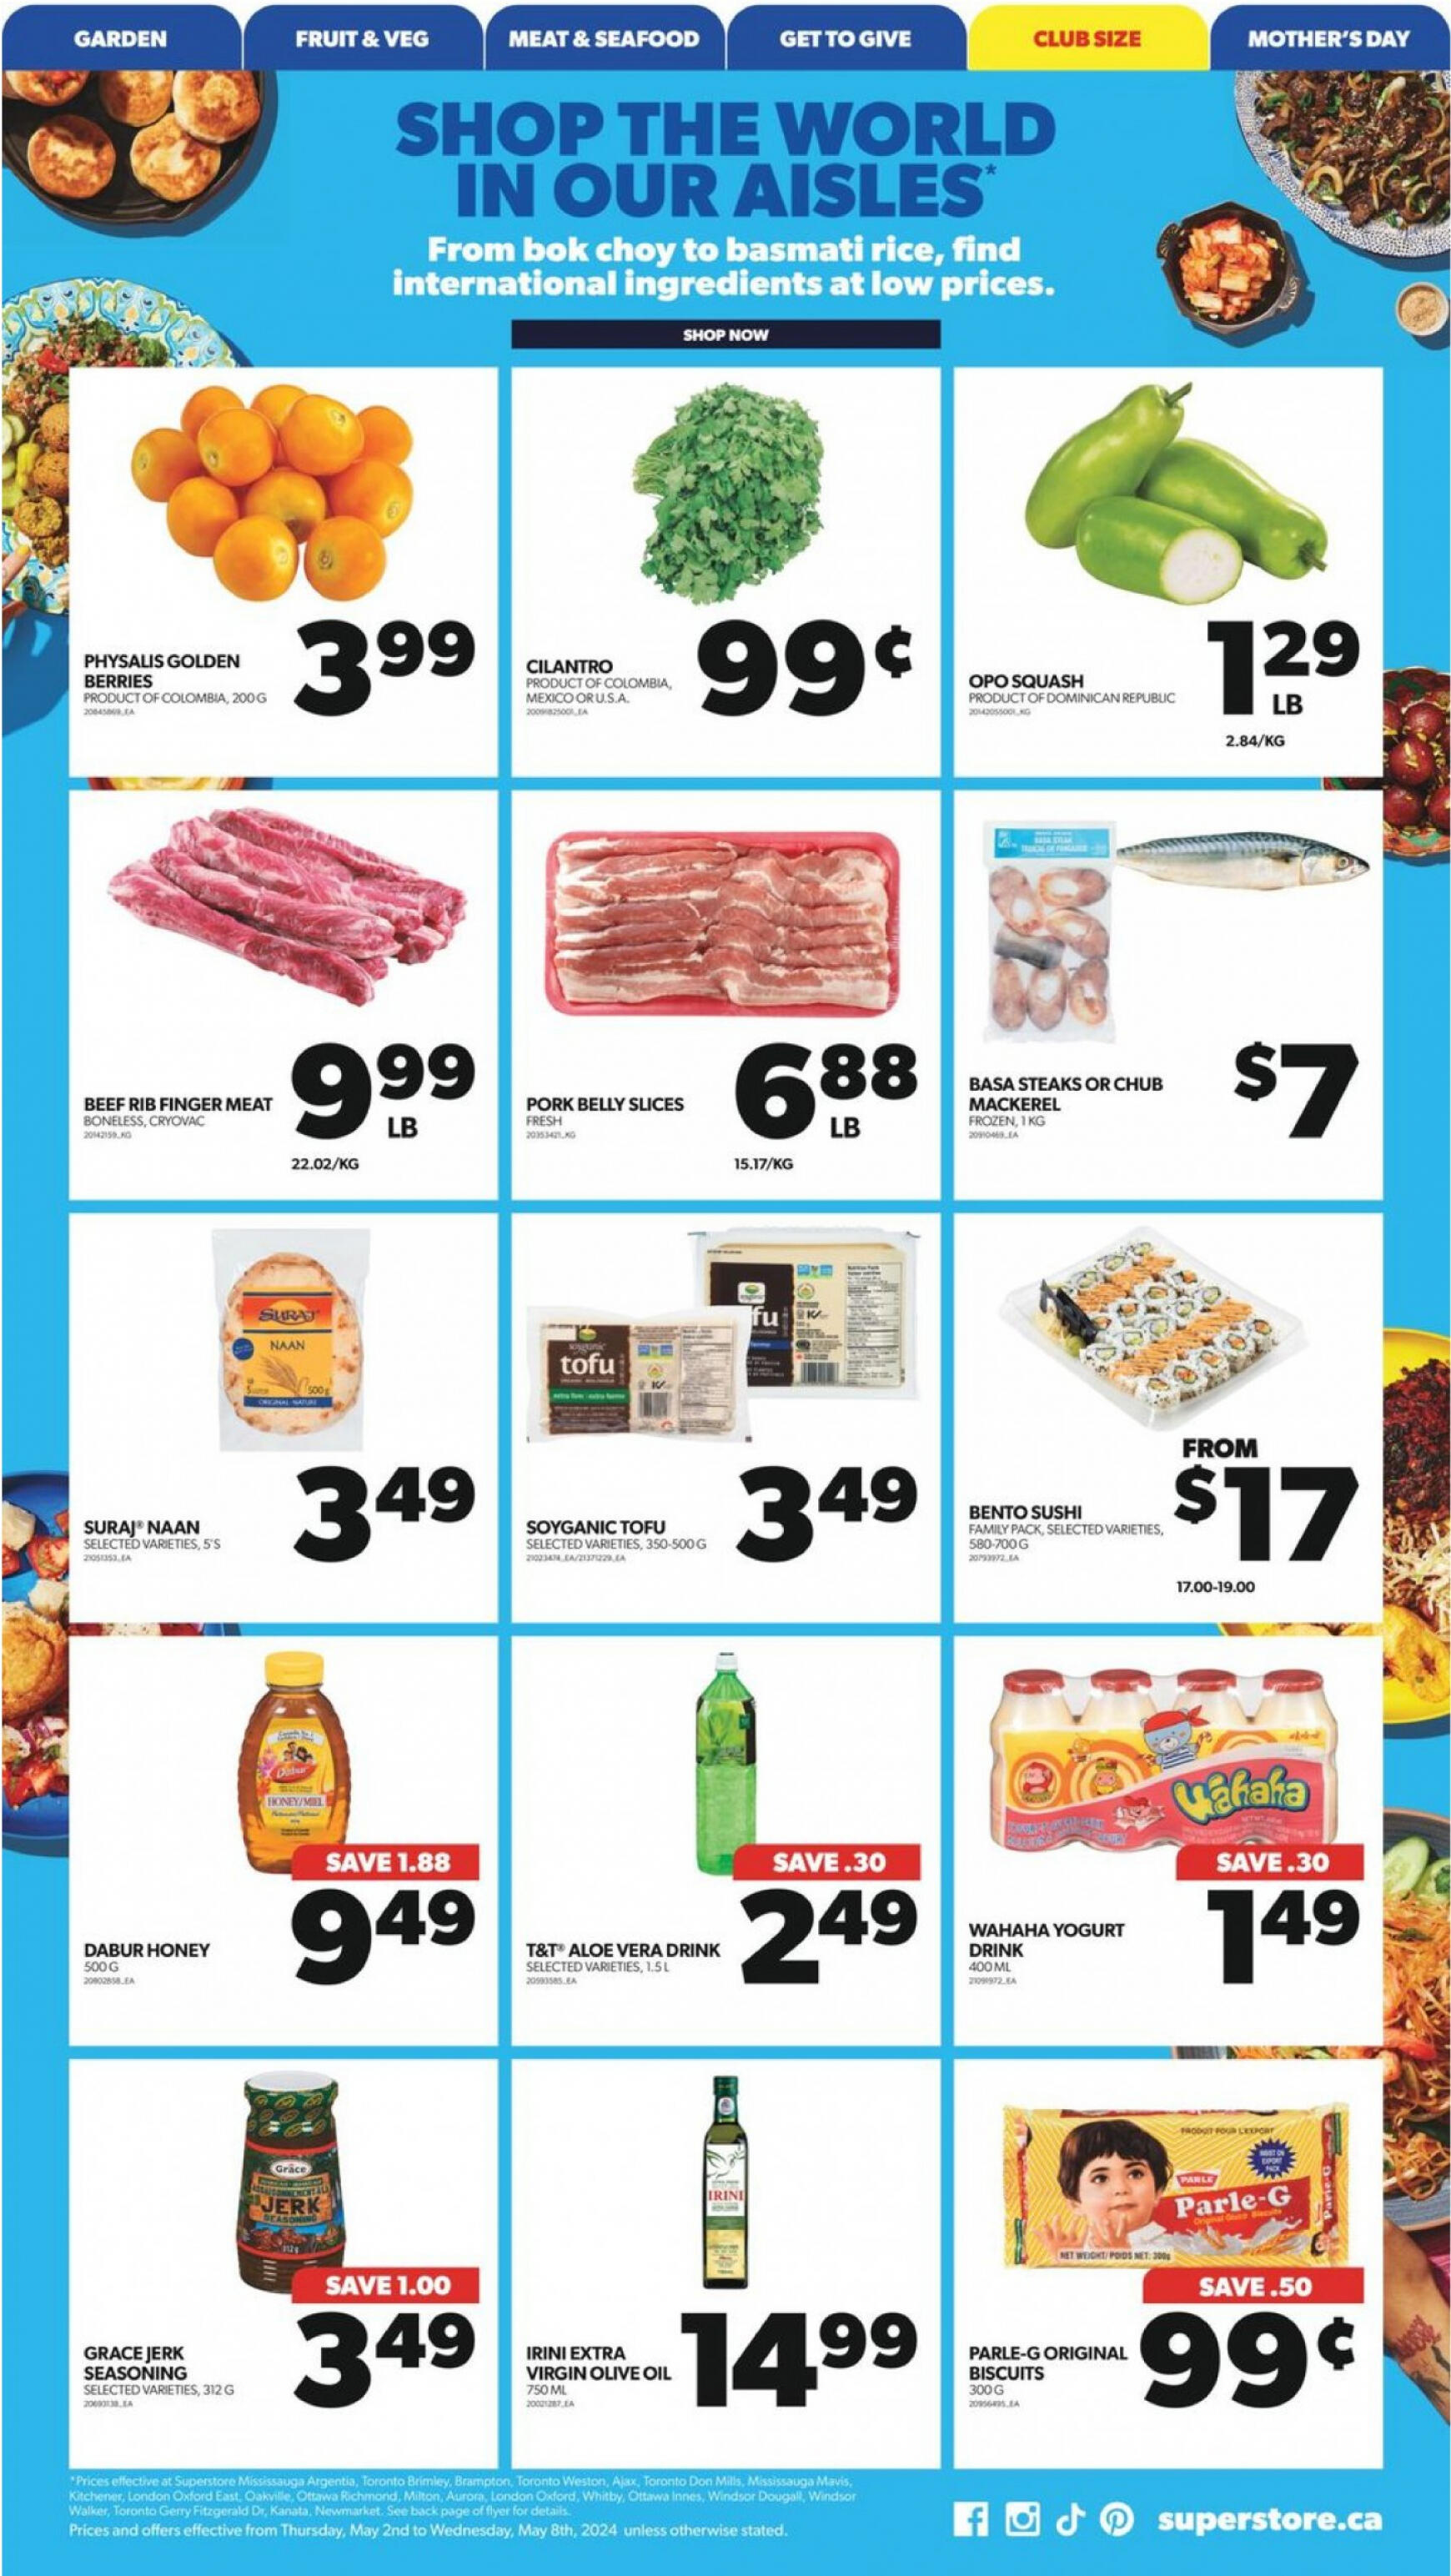 real-canadian-superstore - Real Canadian Superstore flyer current 01.05. - 31.05. - page: 39